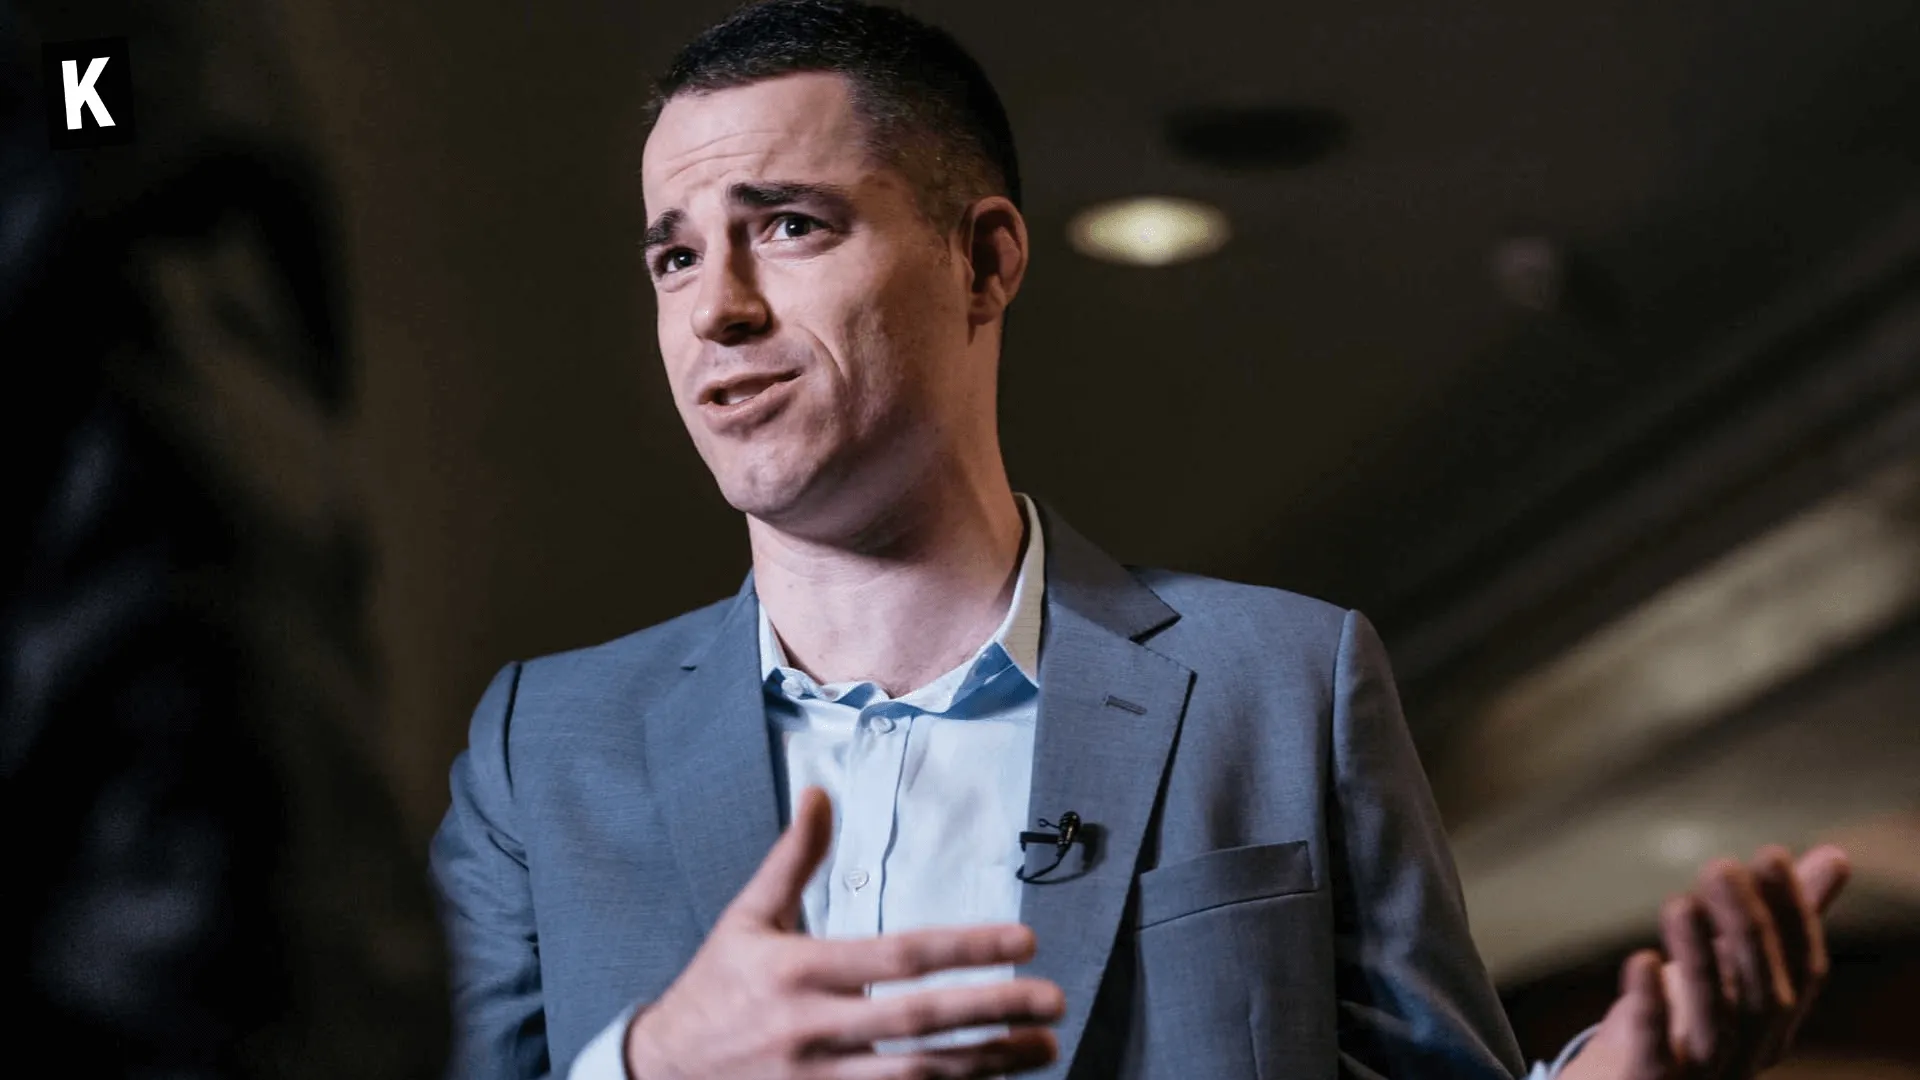 Roger Ver speaking about Bitcoin and Bitcoin cash at a conference